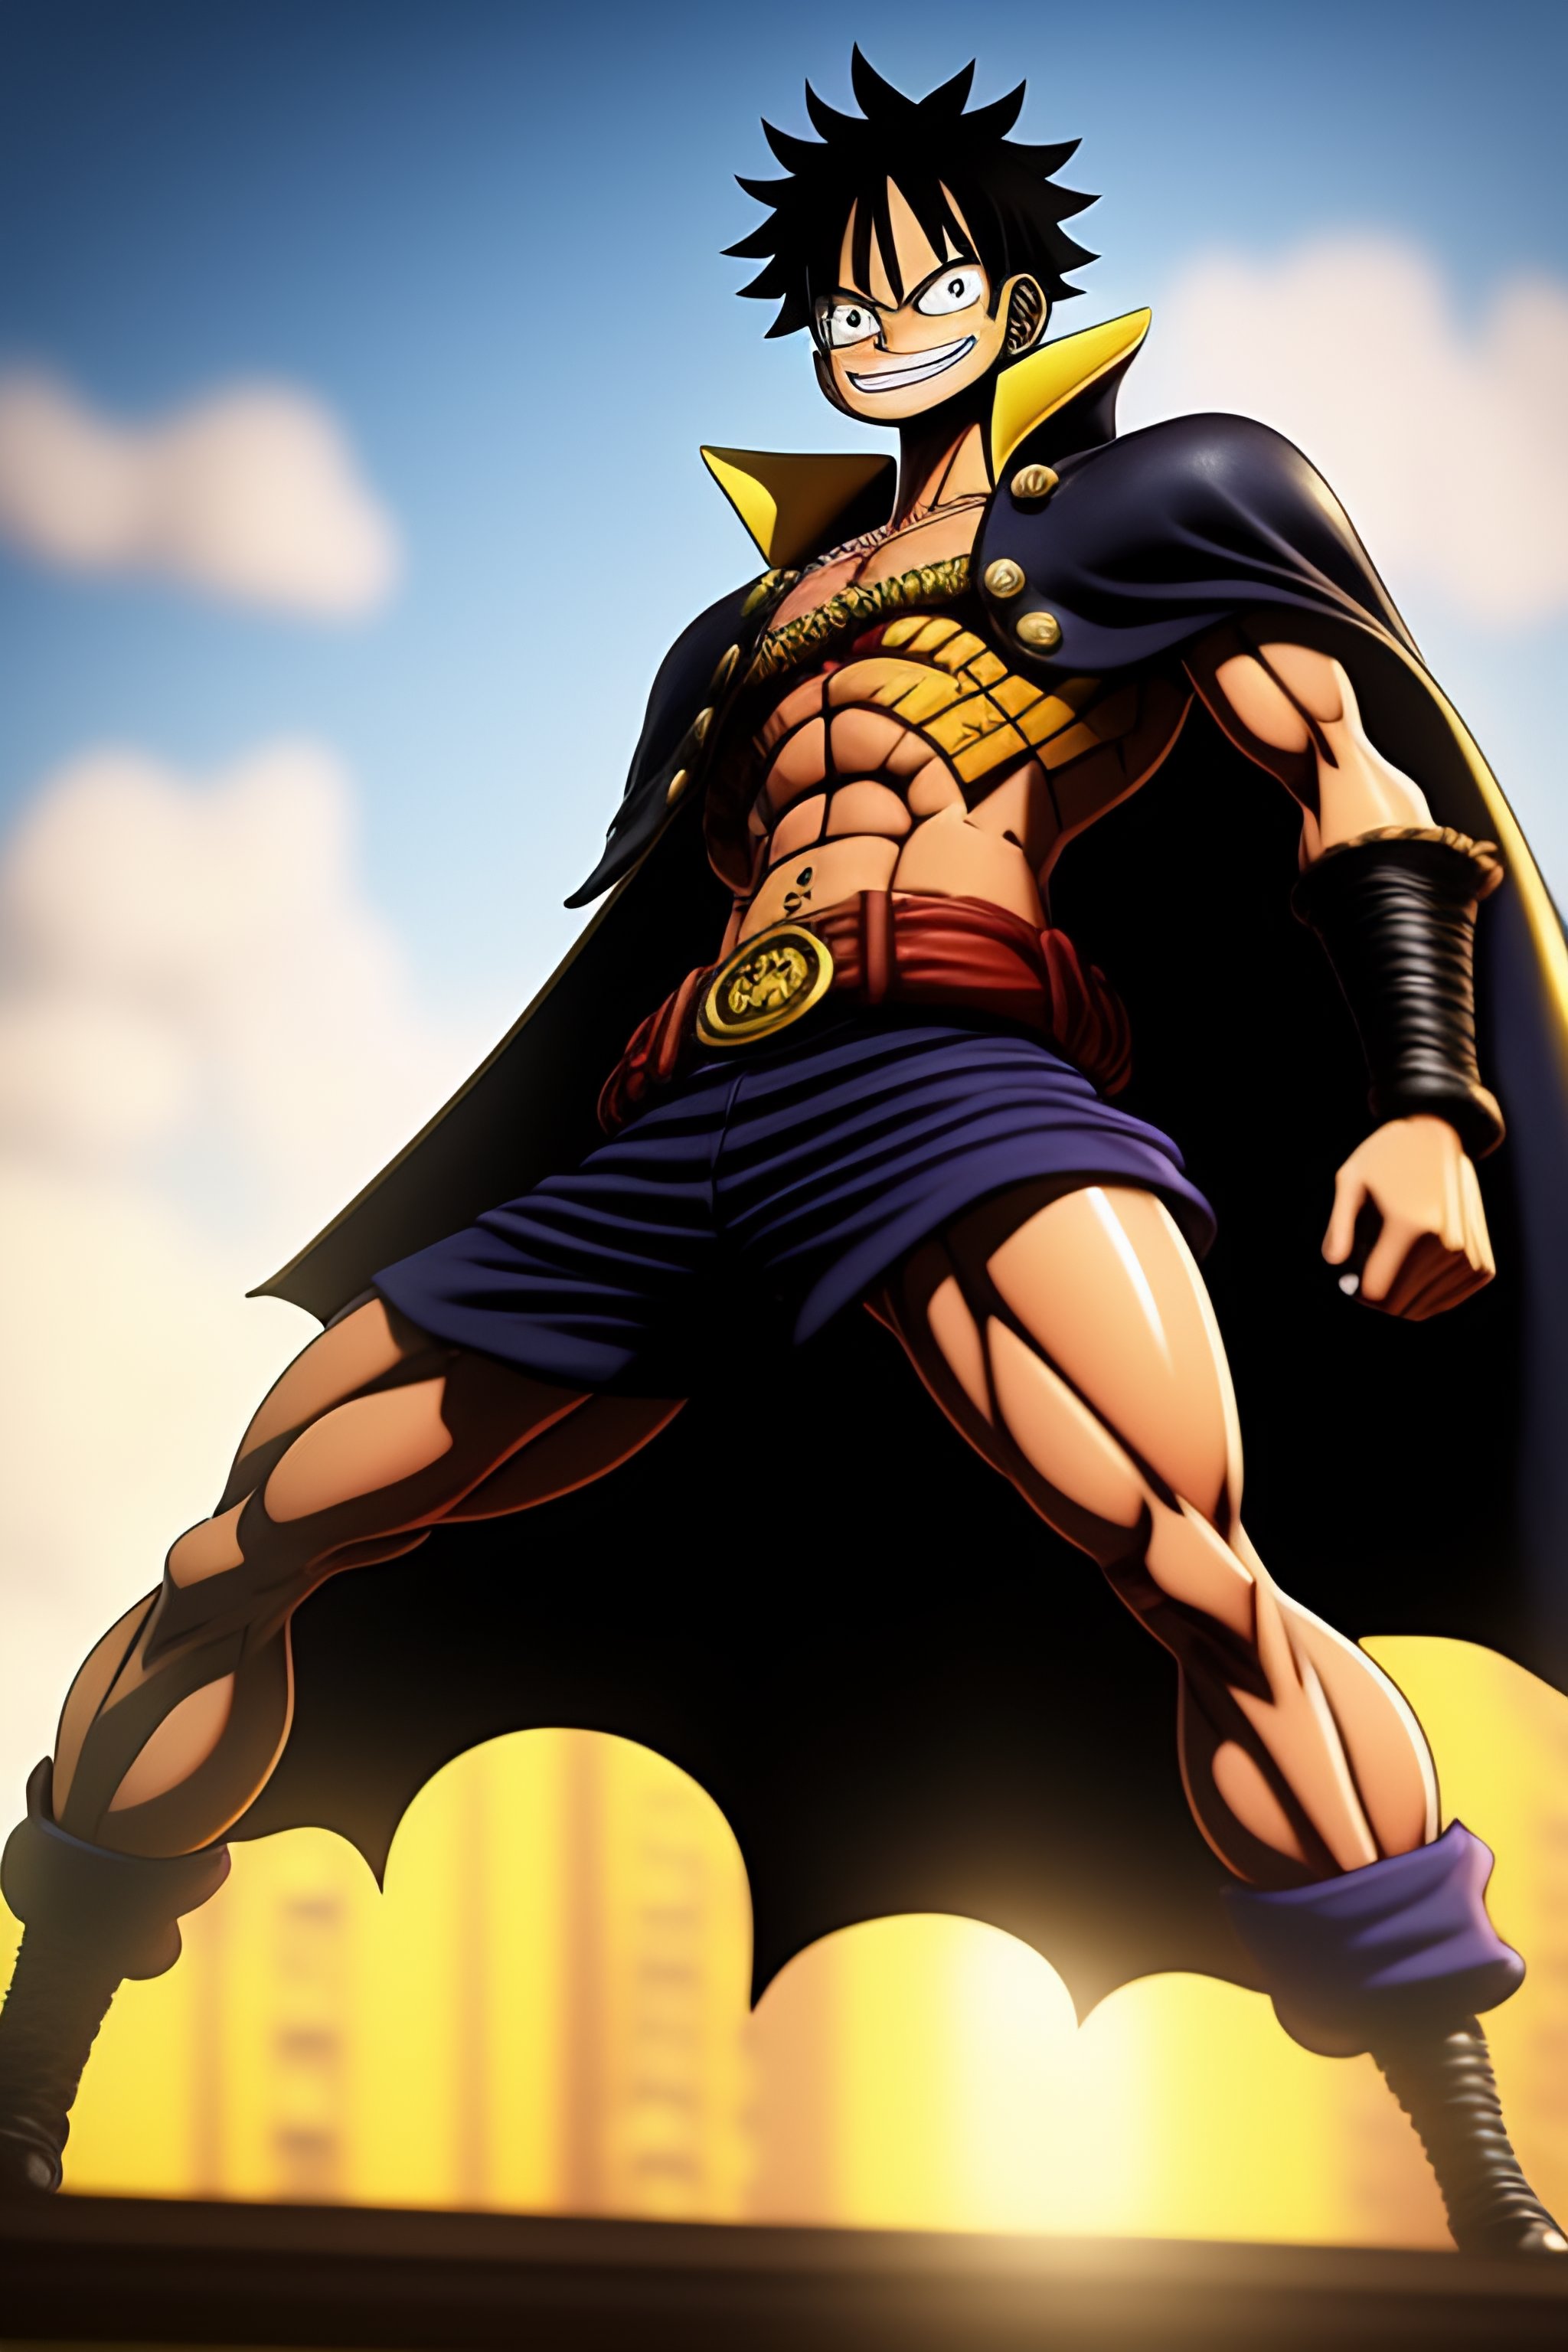 Lexica - Luffy from one piece manga in batman suit